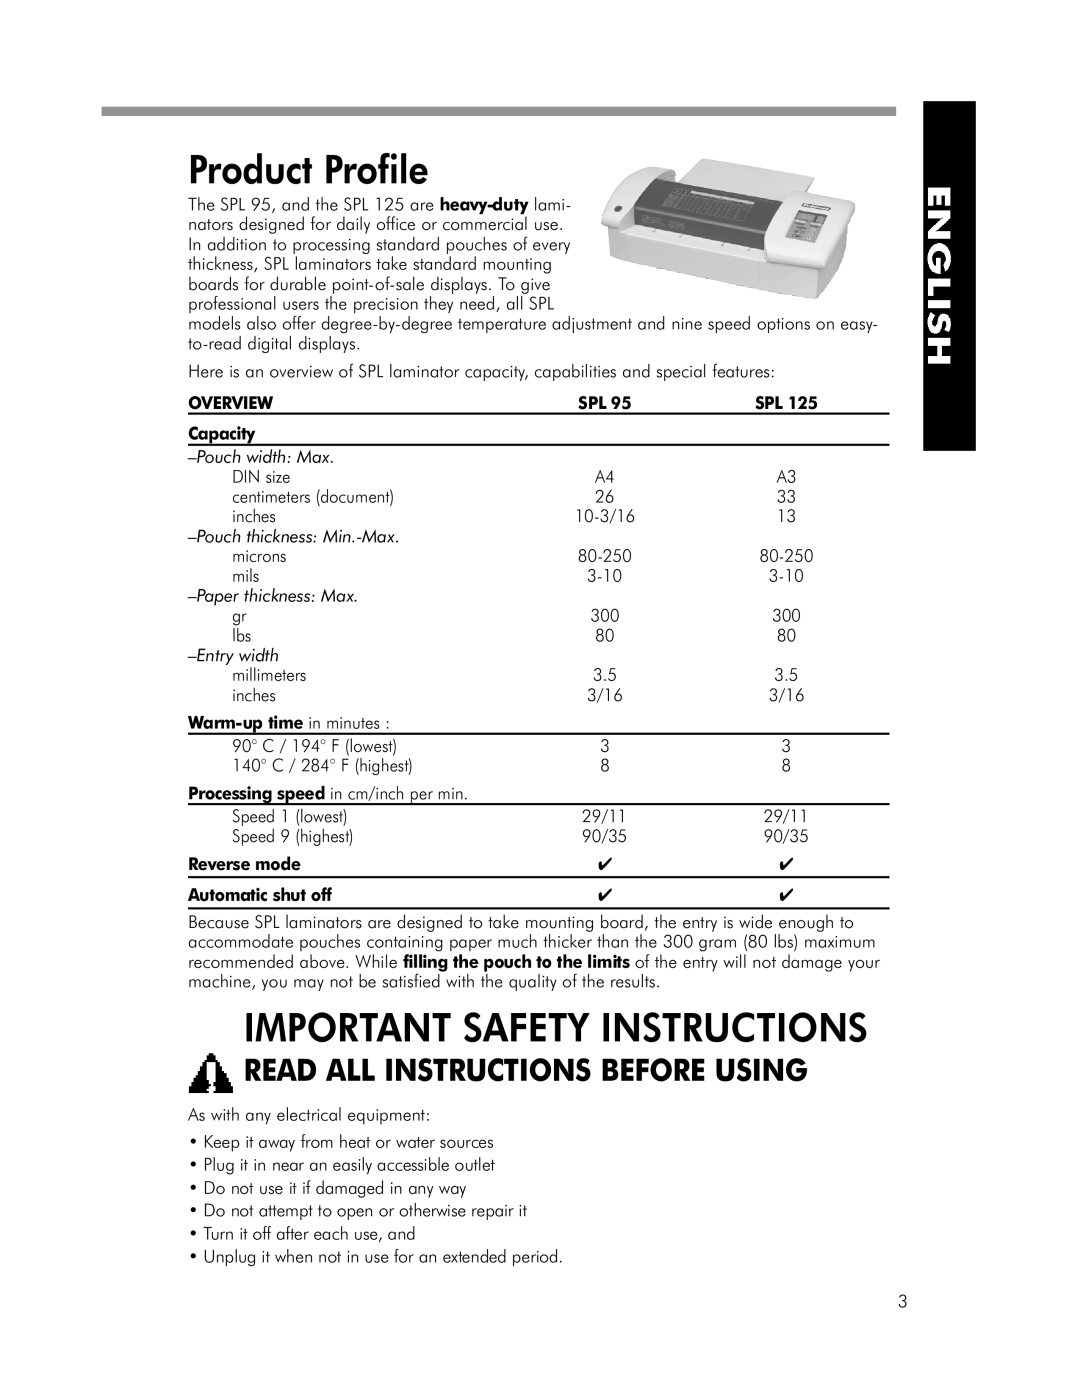 Fellowes SPL 125 Product Profile, Important Safety Instructions, Read All Instructions Before Using, Overview, Capacity 